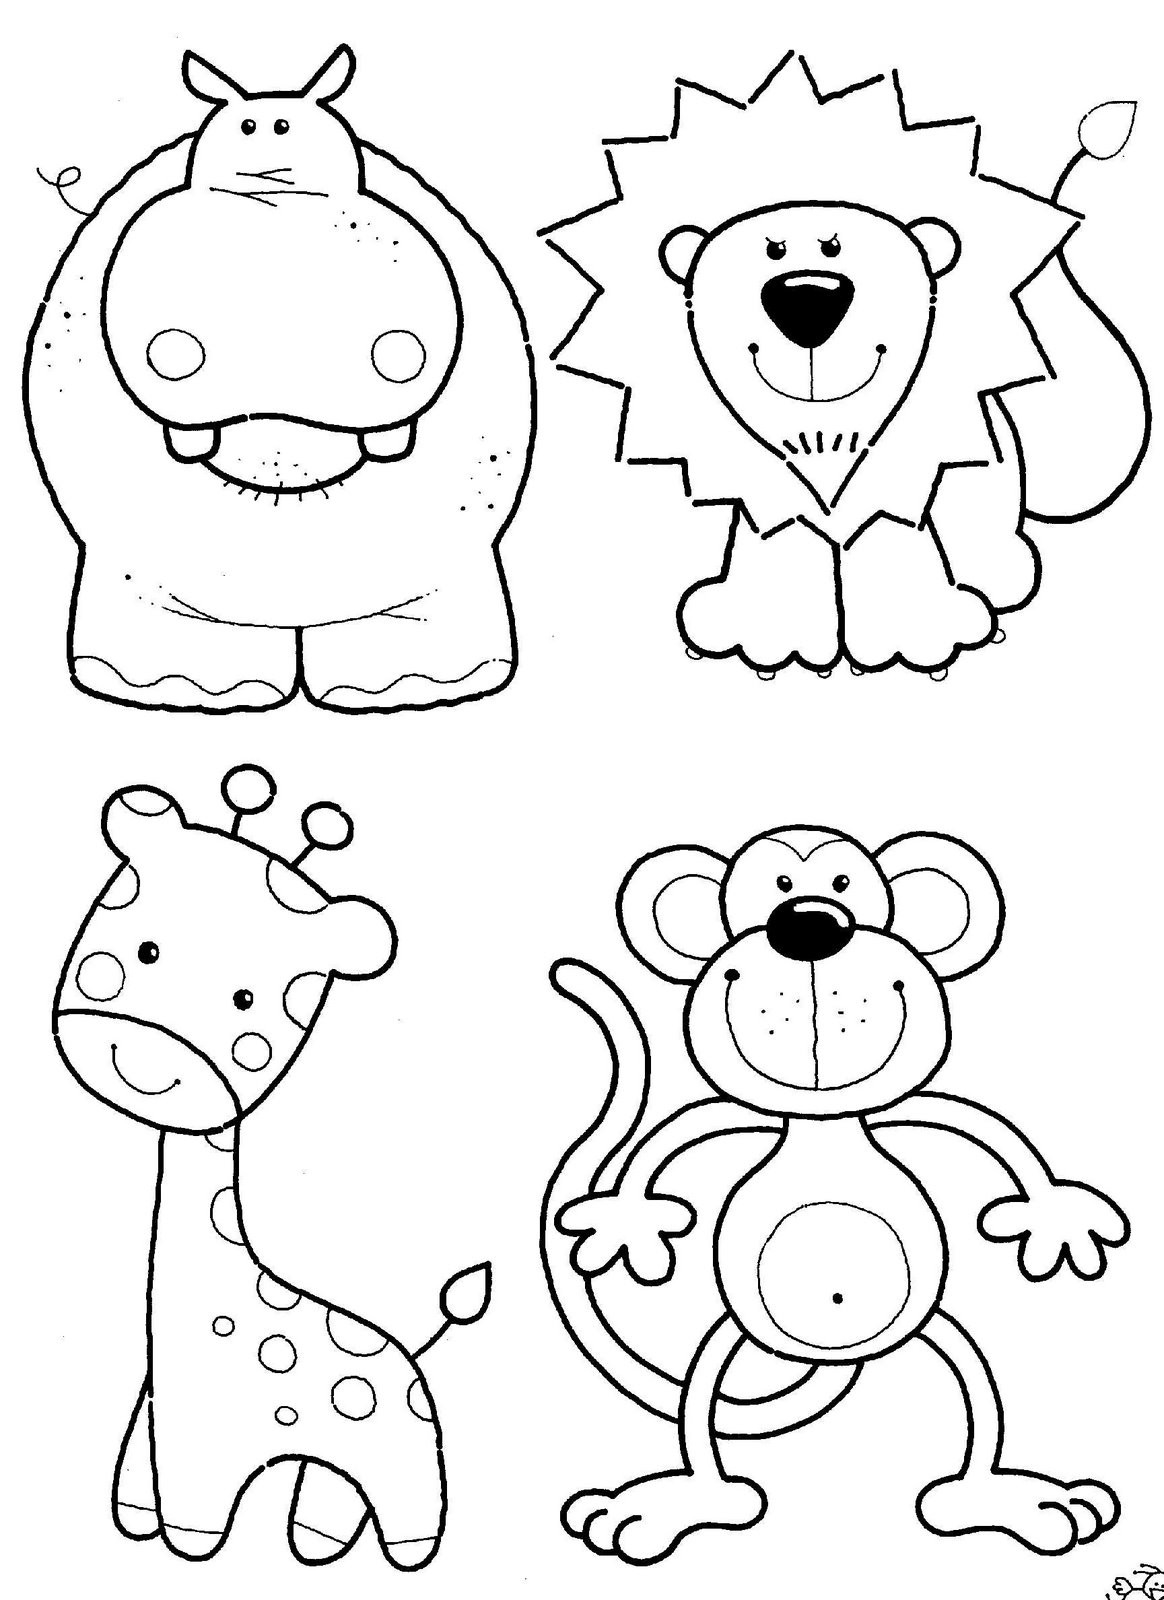 Printable Coloring Pages For Kids Animals
 Coloring Ville